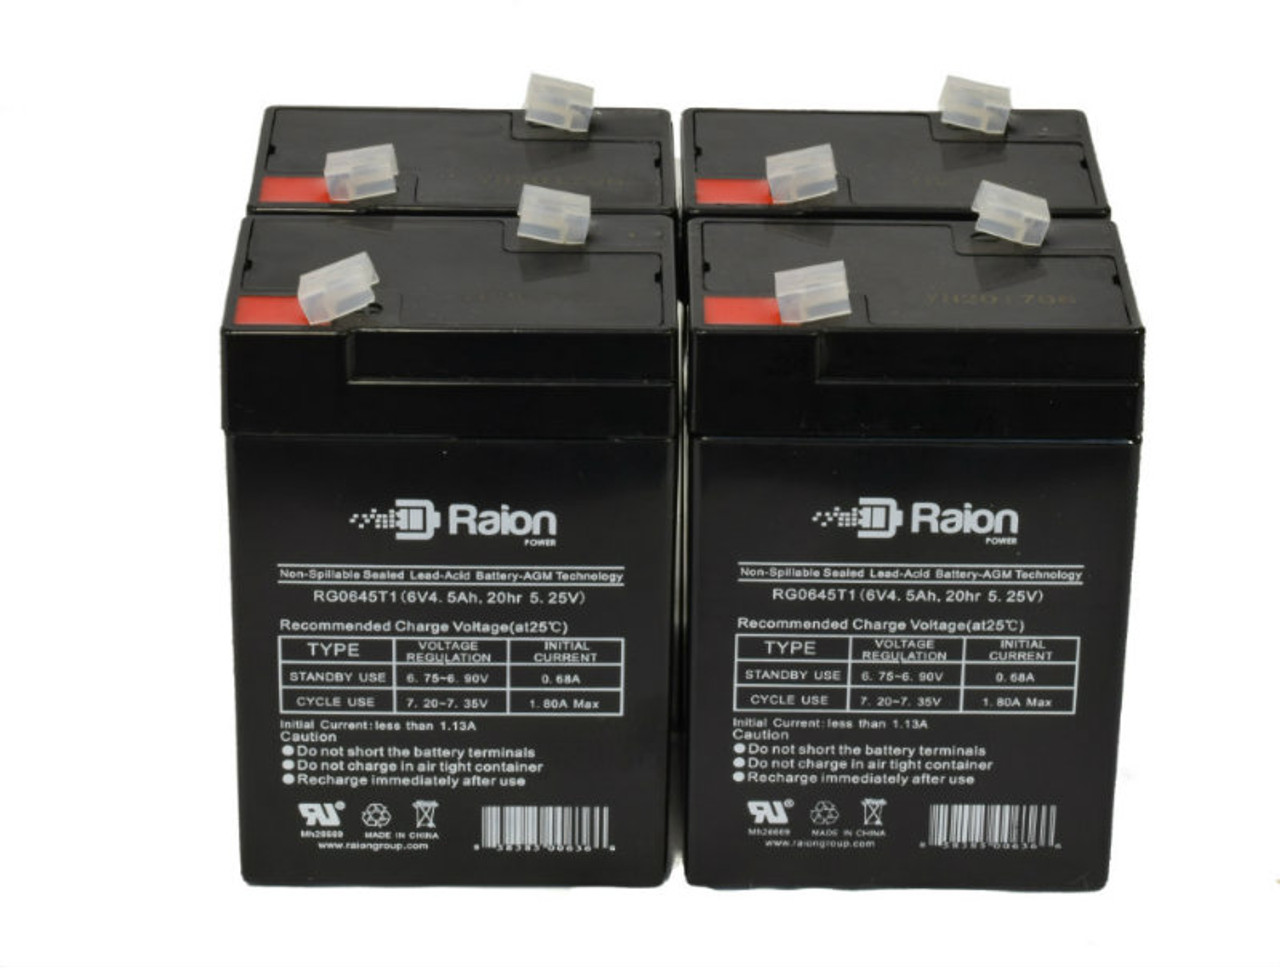 Raion Power 6V 4.5Ah Replacement Emergency Light Battery for Lithonia EM1060601 - 4 Pack